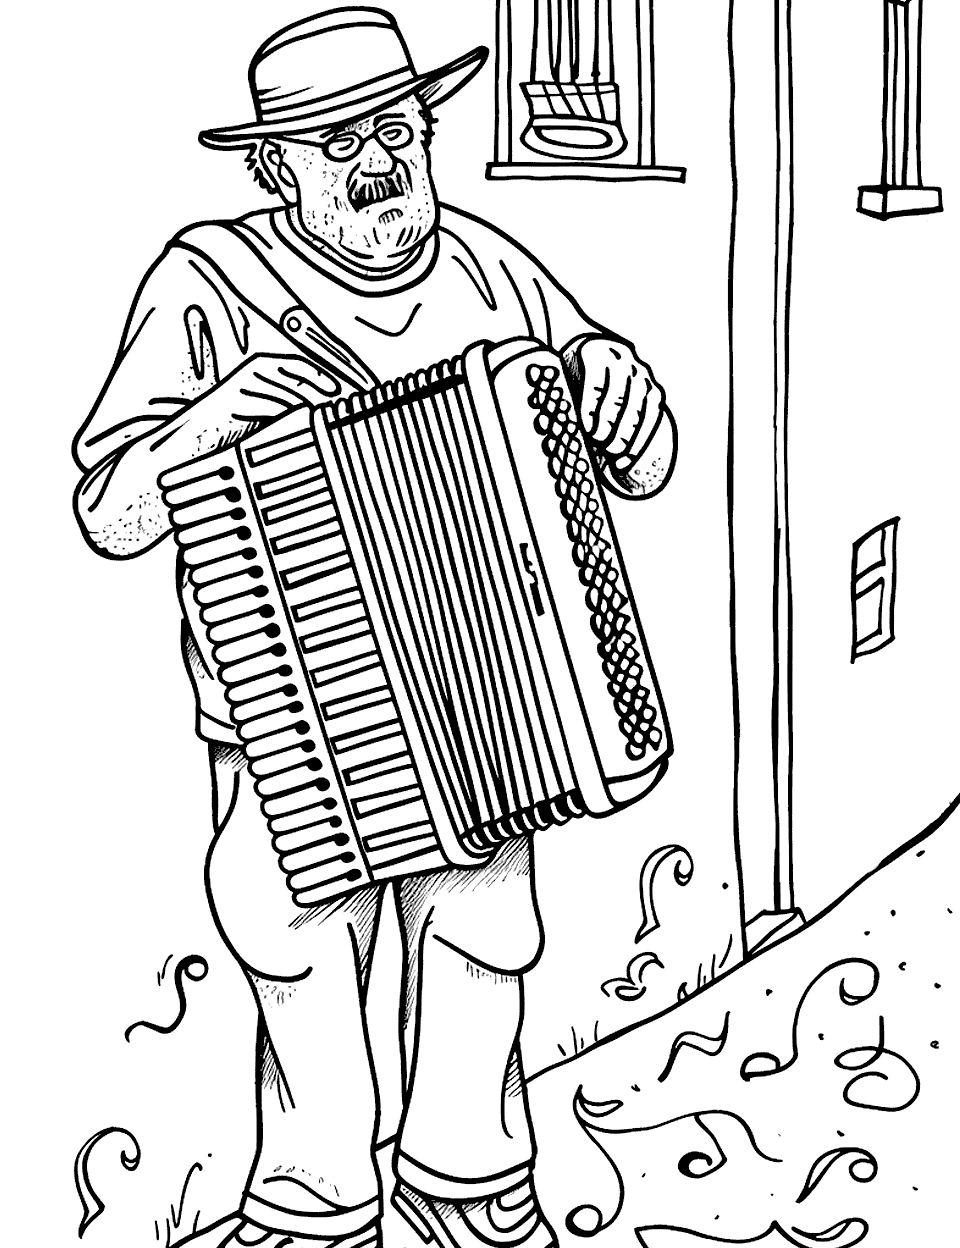 Accordion Player in an Alley Music Coloring Page - An elderly man playing an accordion in a quaint European alley.